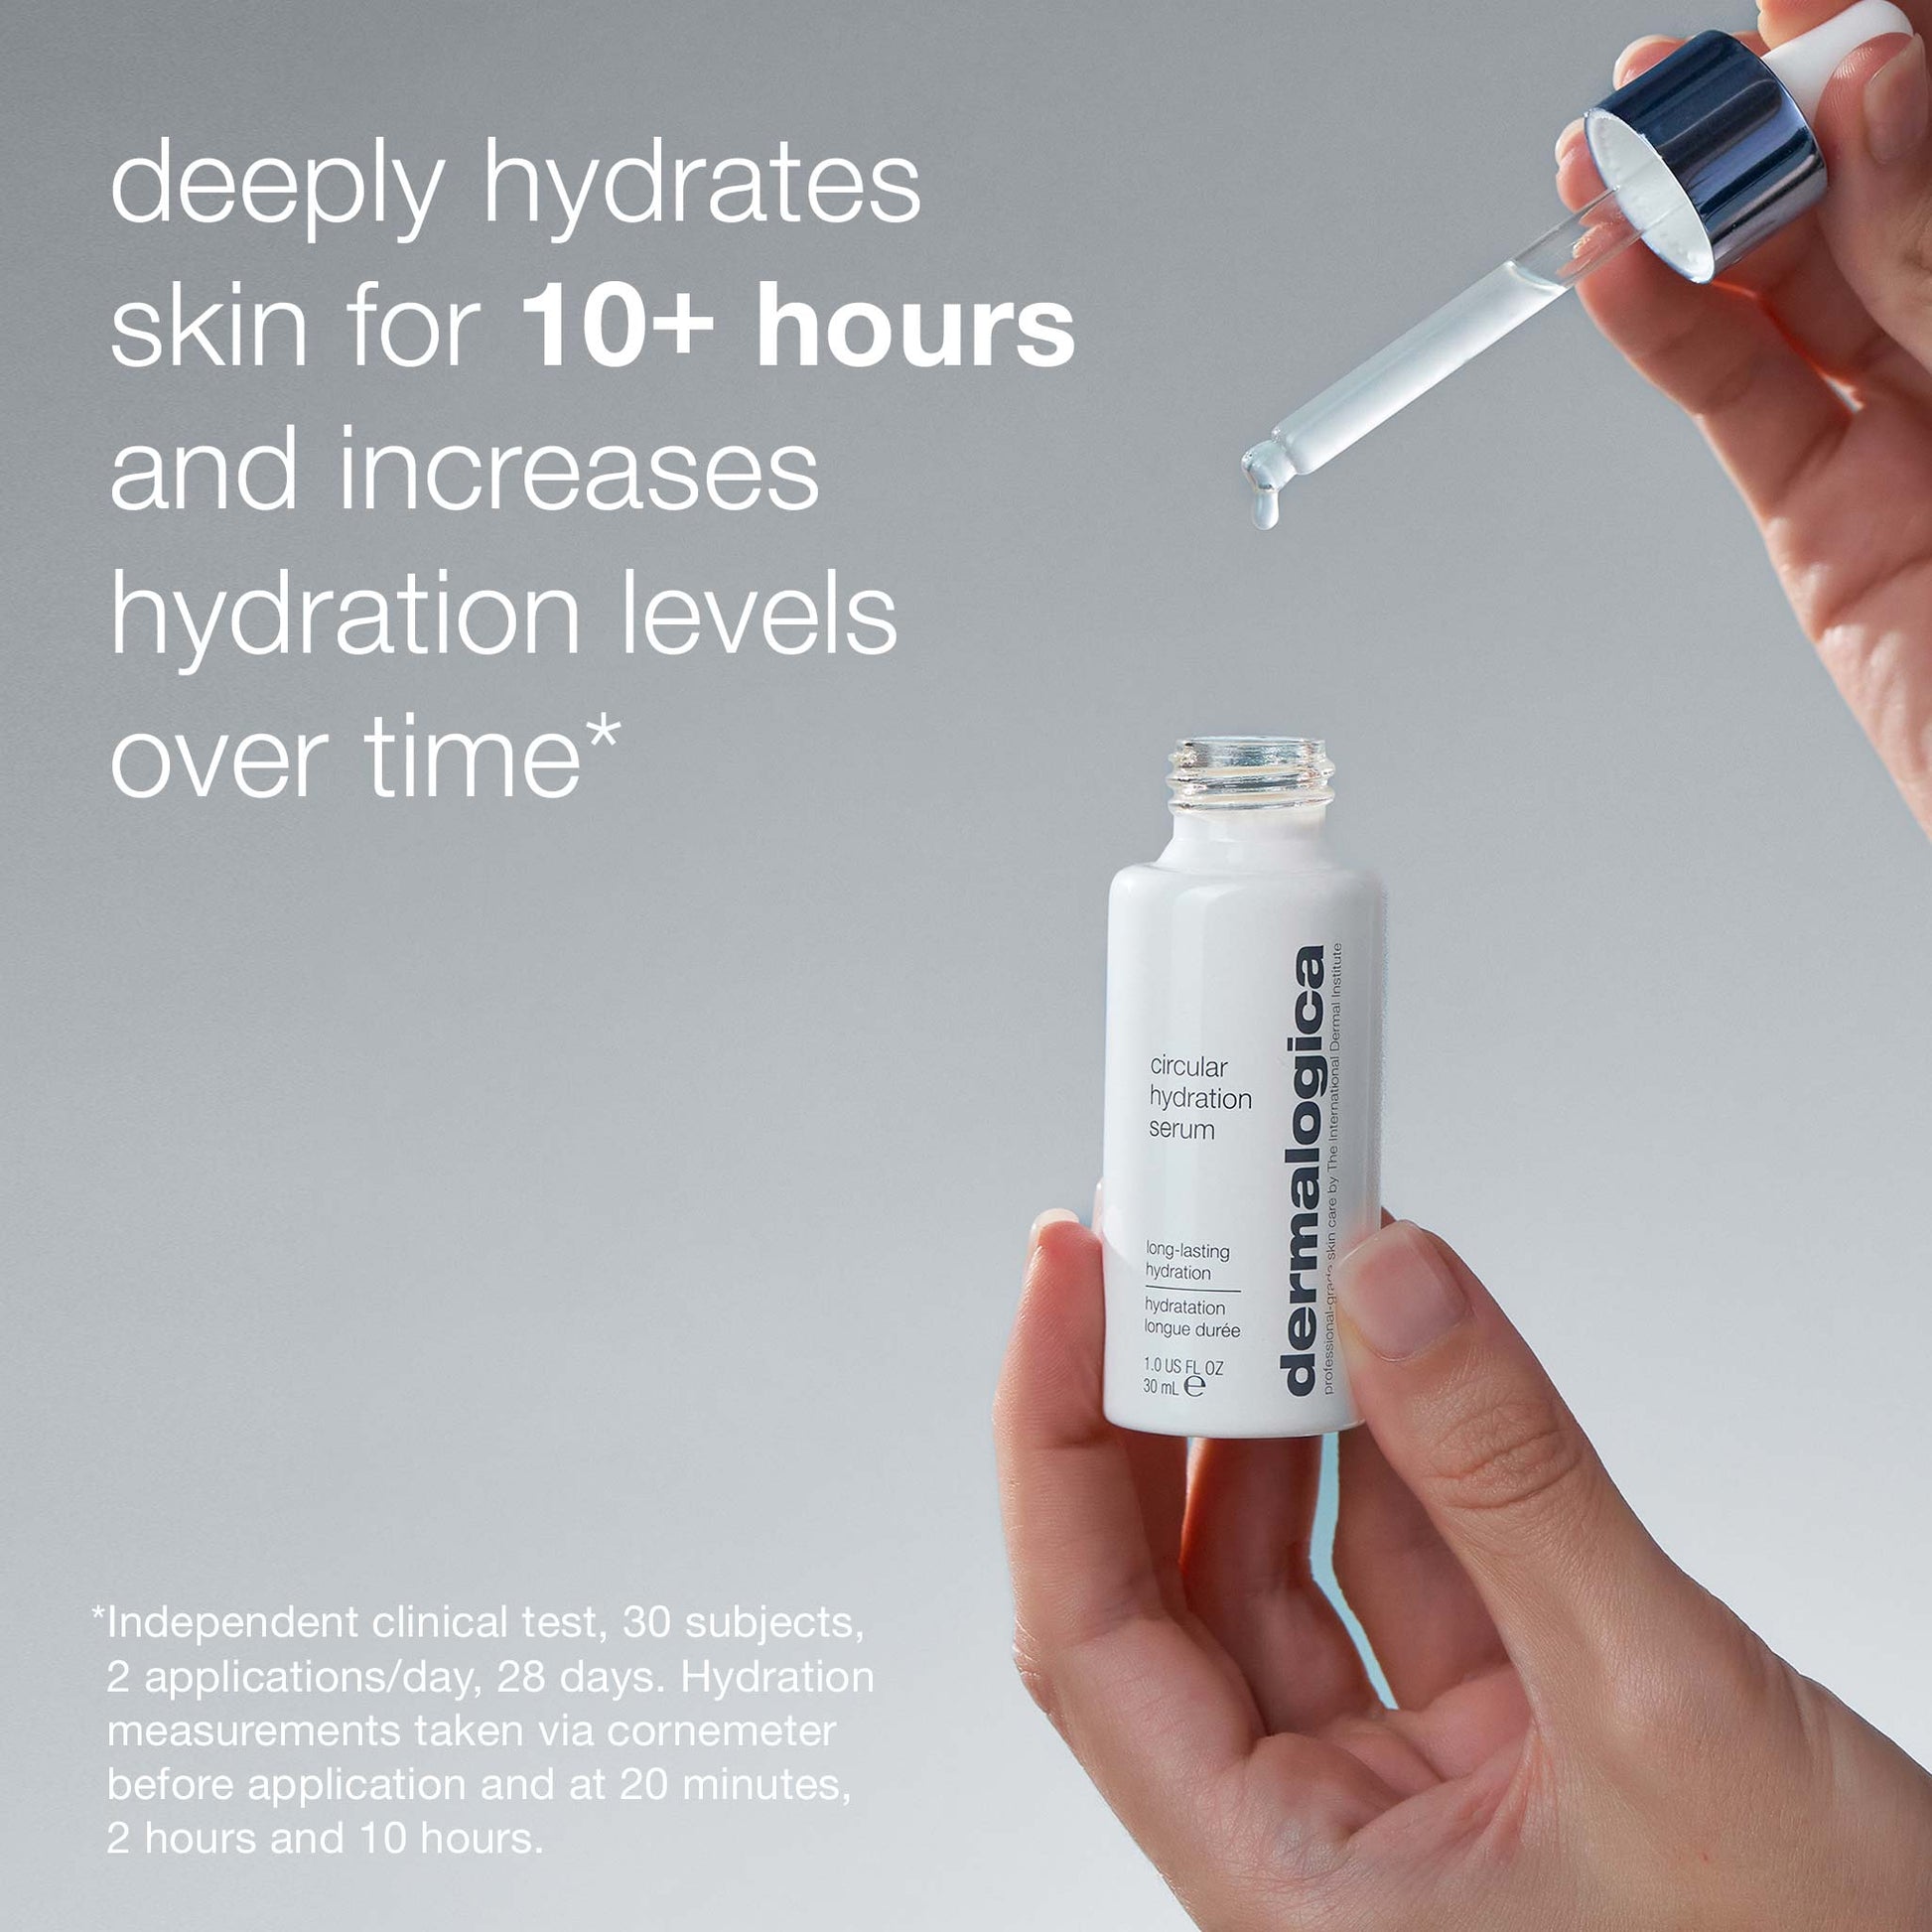 circular hydration serum- deeply hydrates skin for 10+ hours and increases hydration levels over time